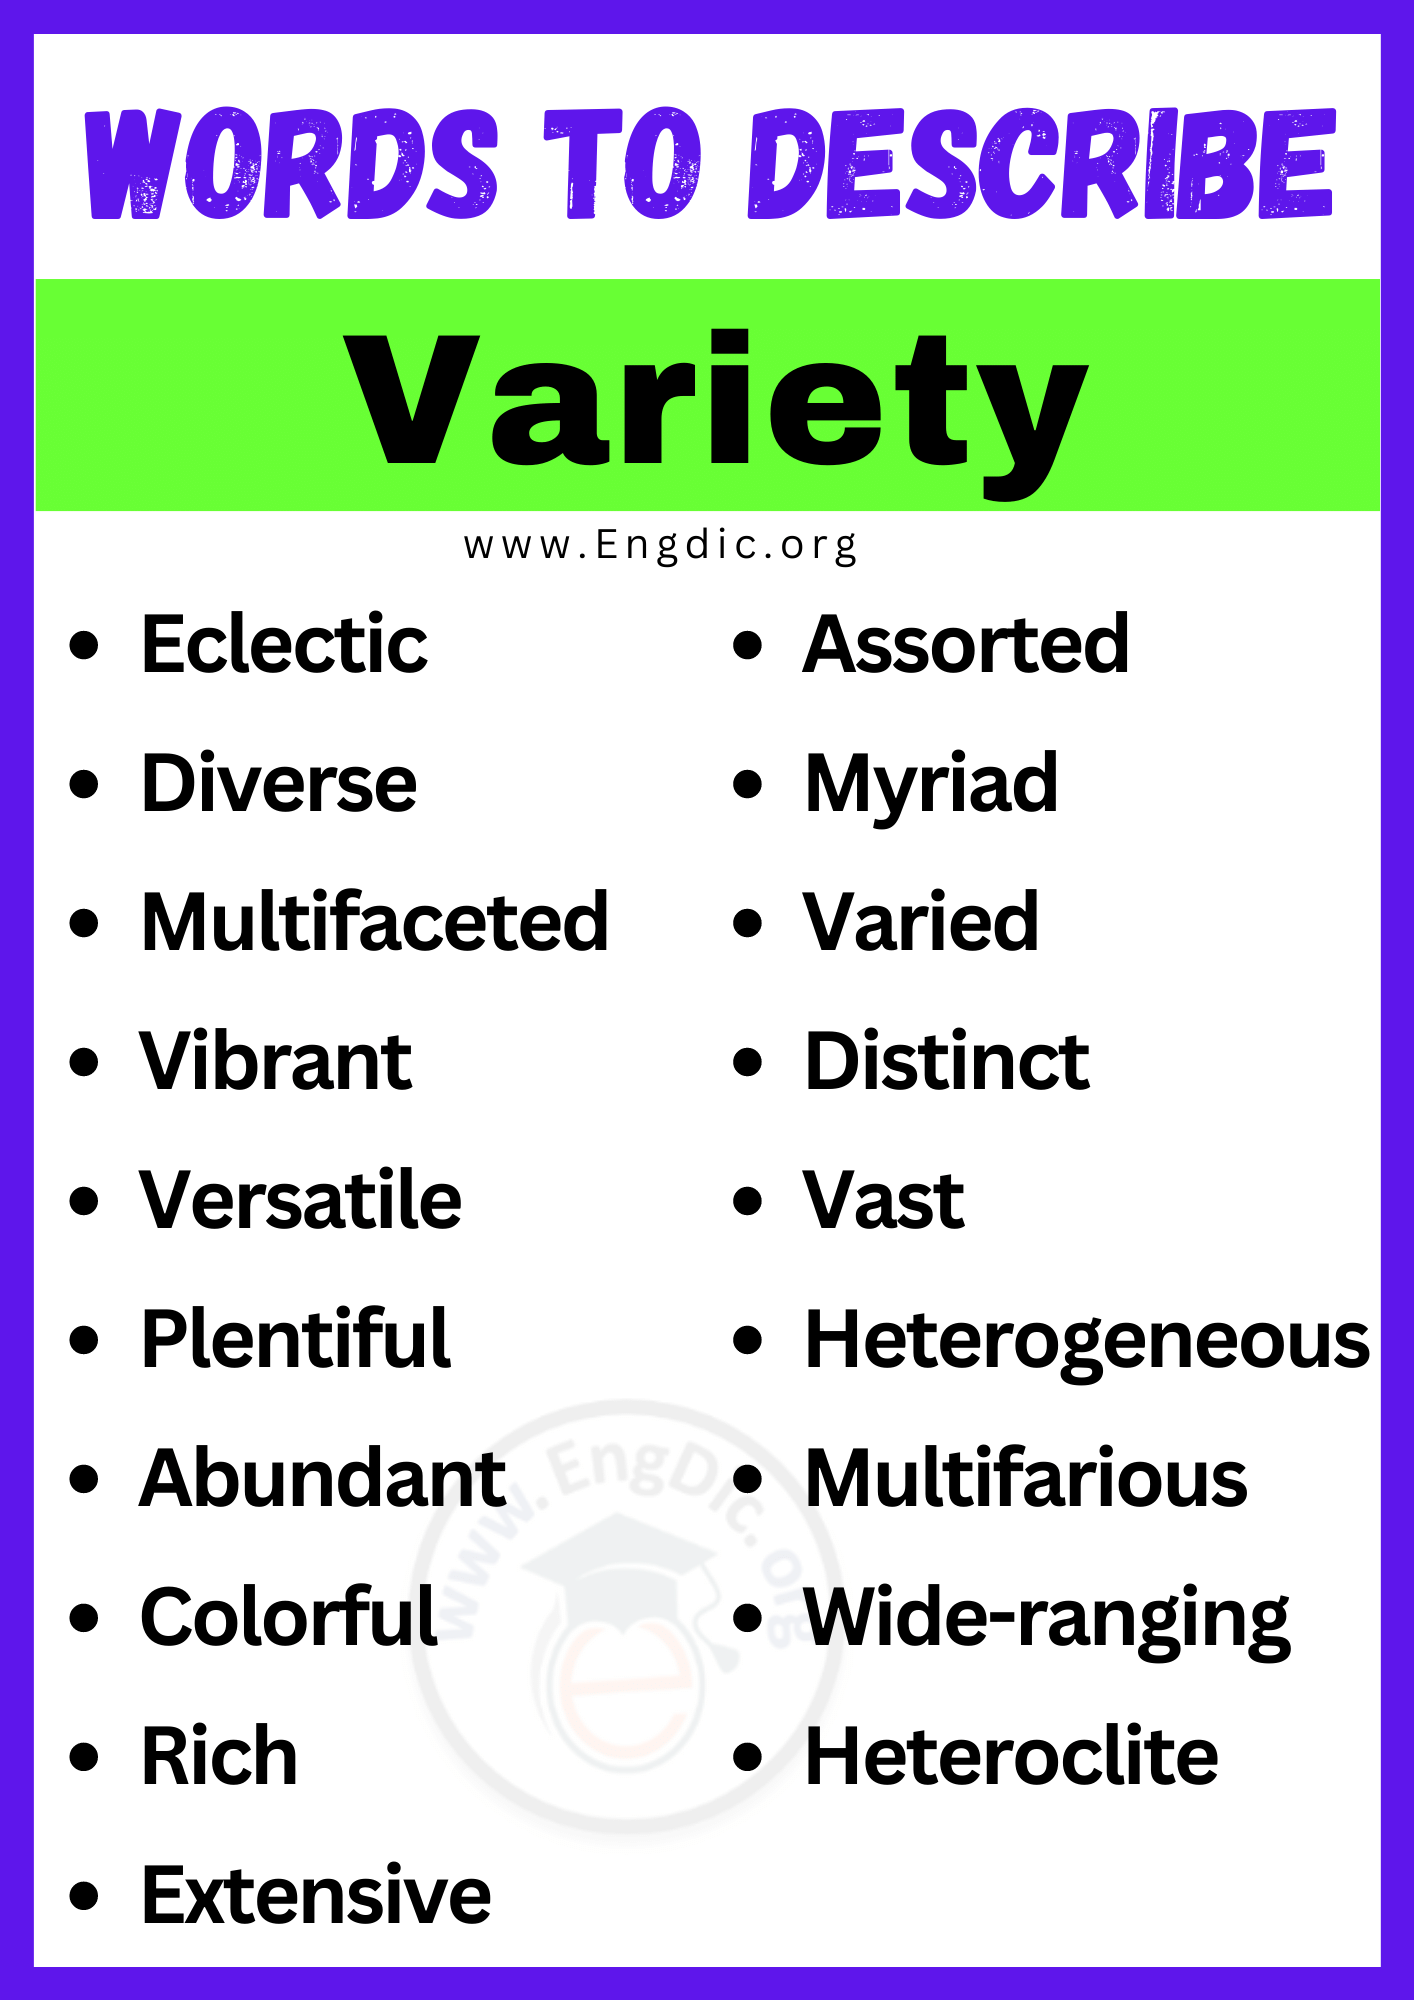 Words to Describe Variety